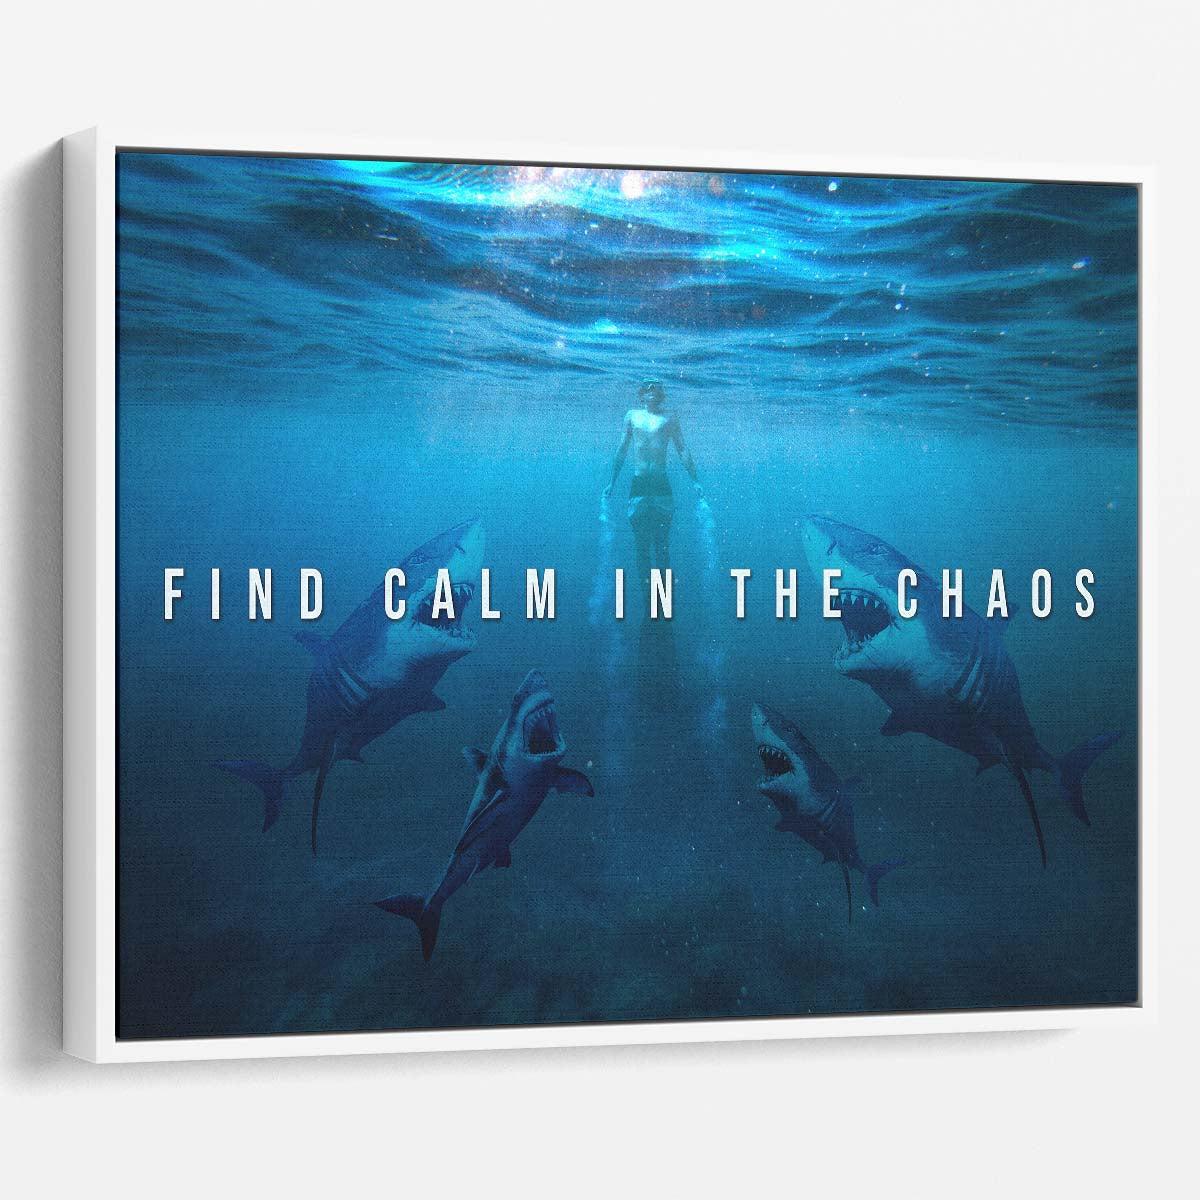 Find Calm In Chaos Wall Art by Luxuriance Designs. Made in USA.